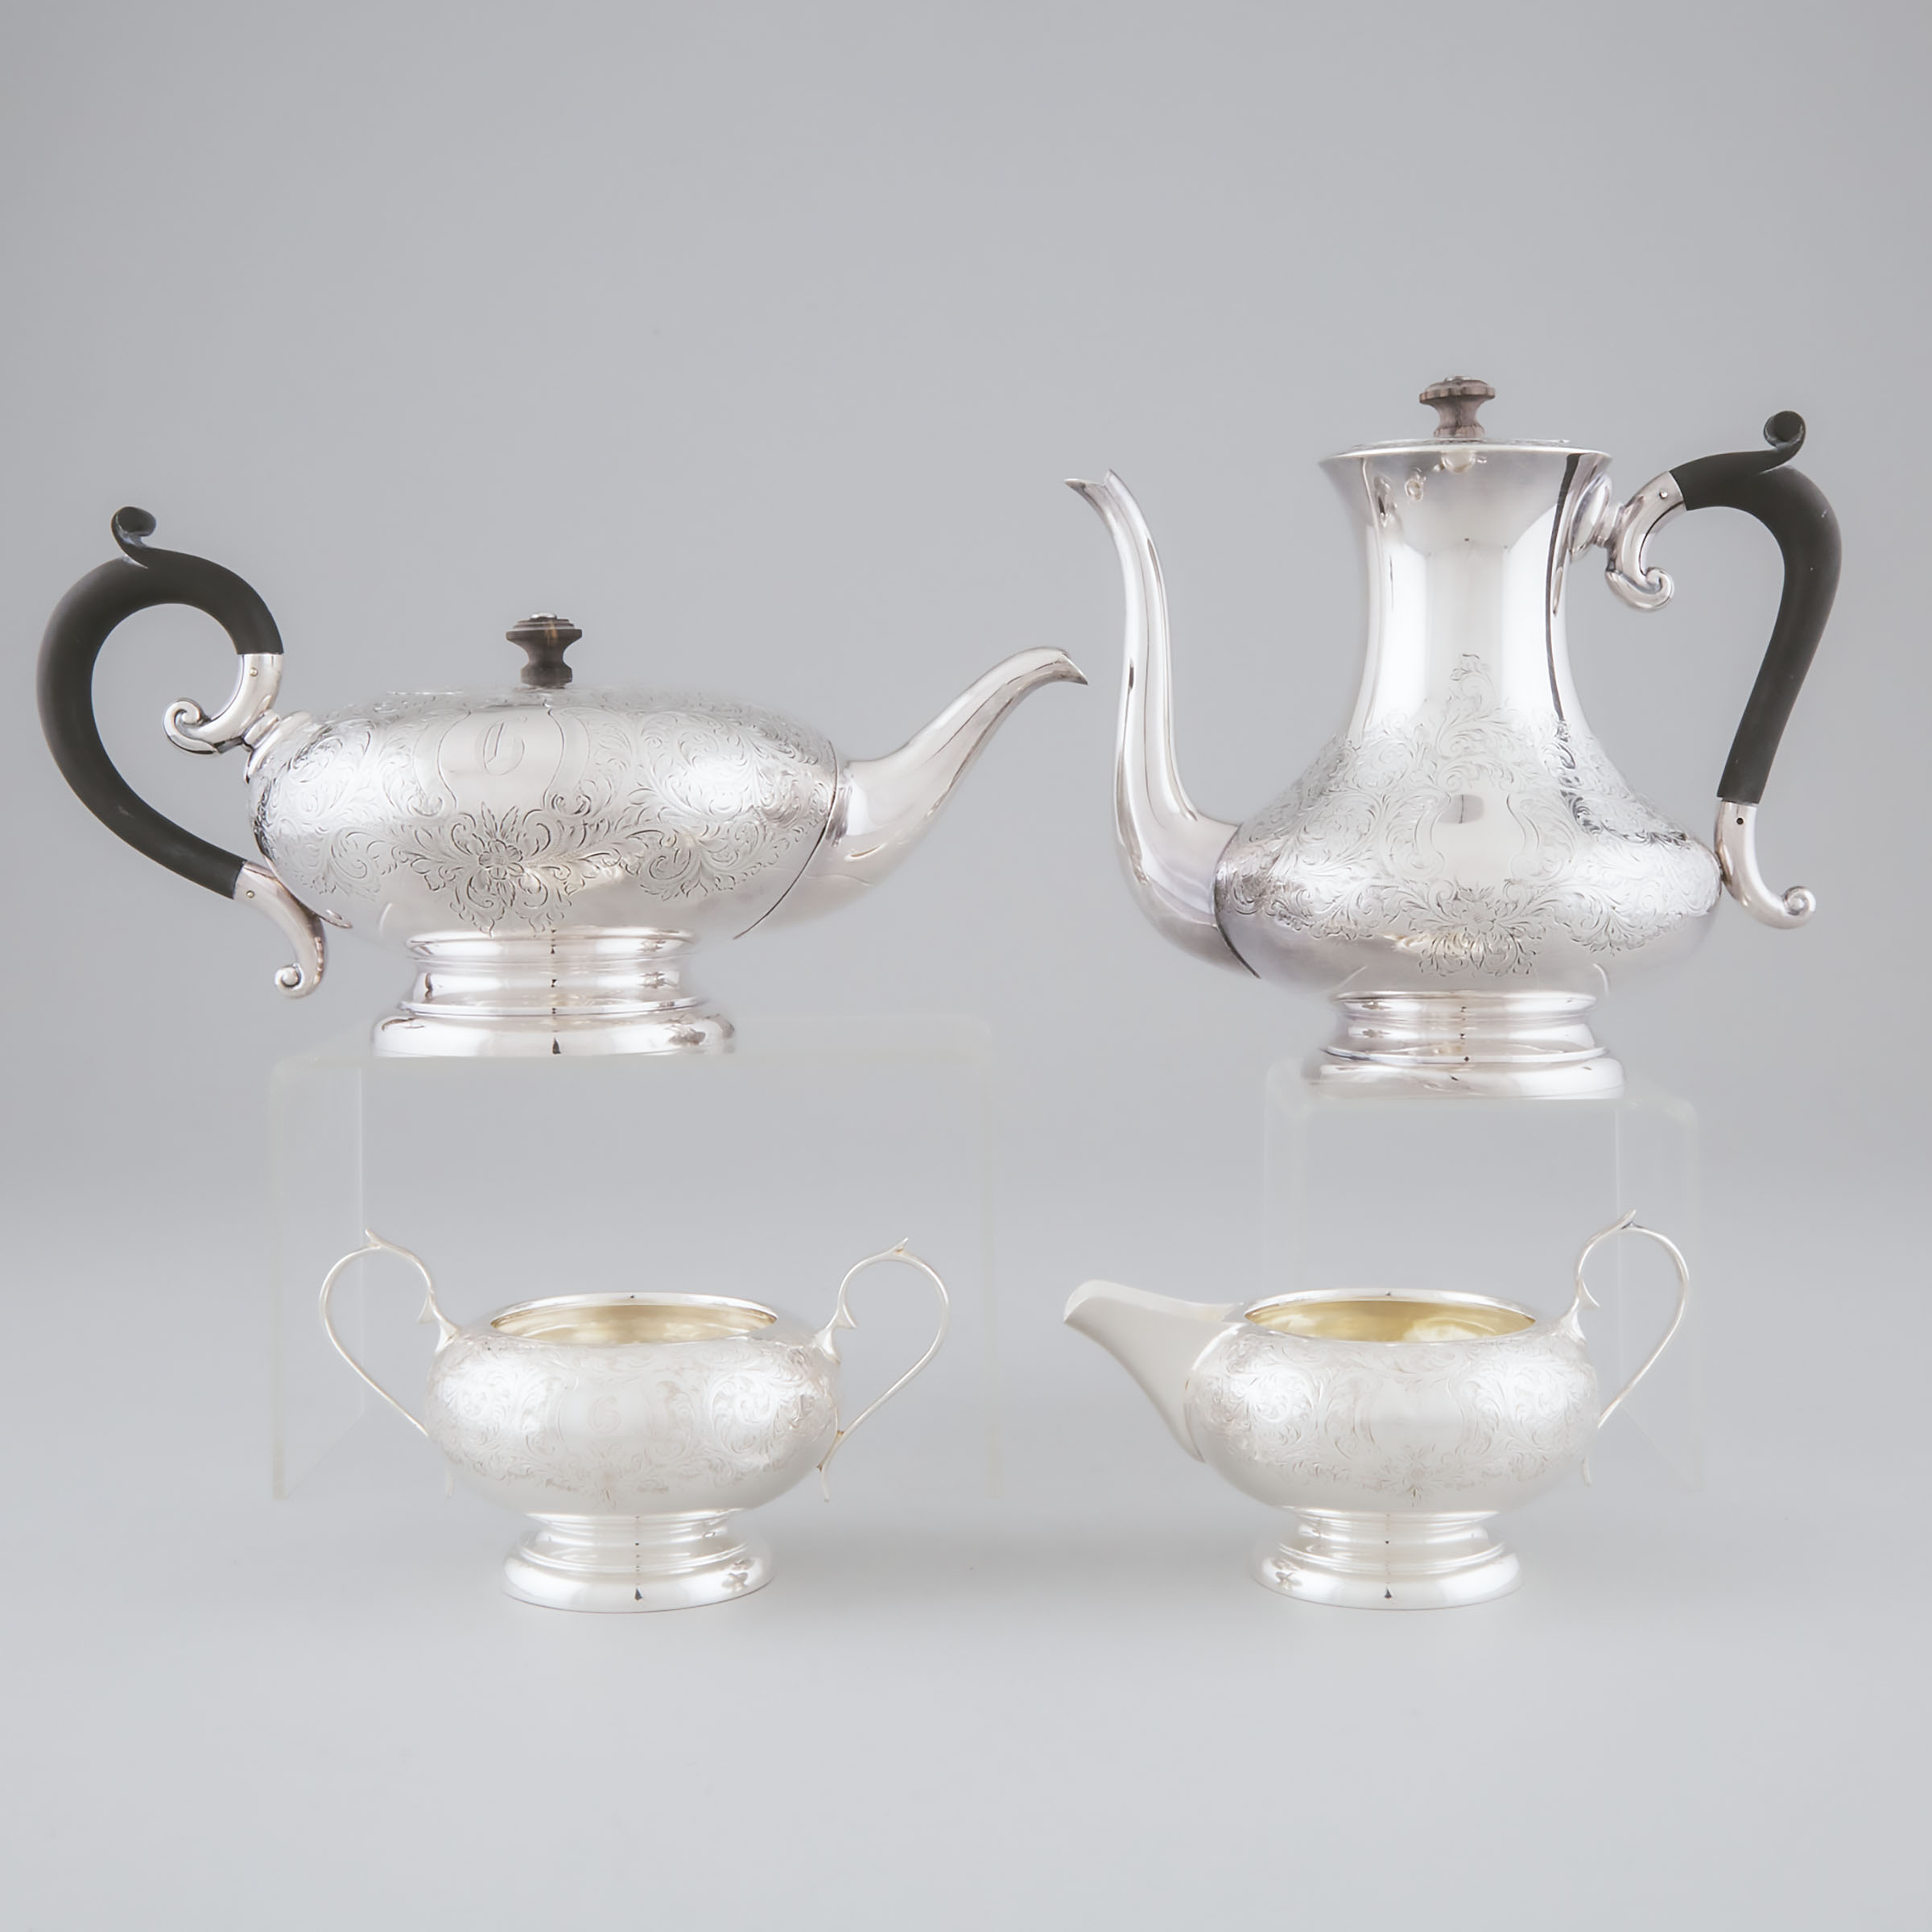 English Silver Tea and Coffee Service, Charles S. Green & Co., Birmingham, 1927/29